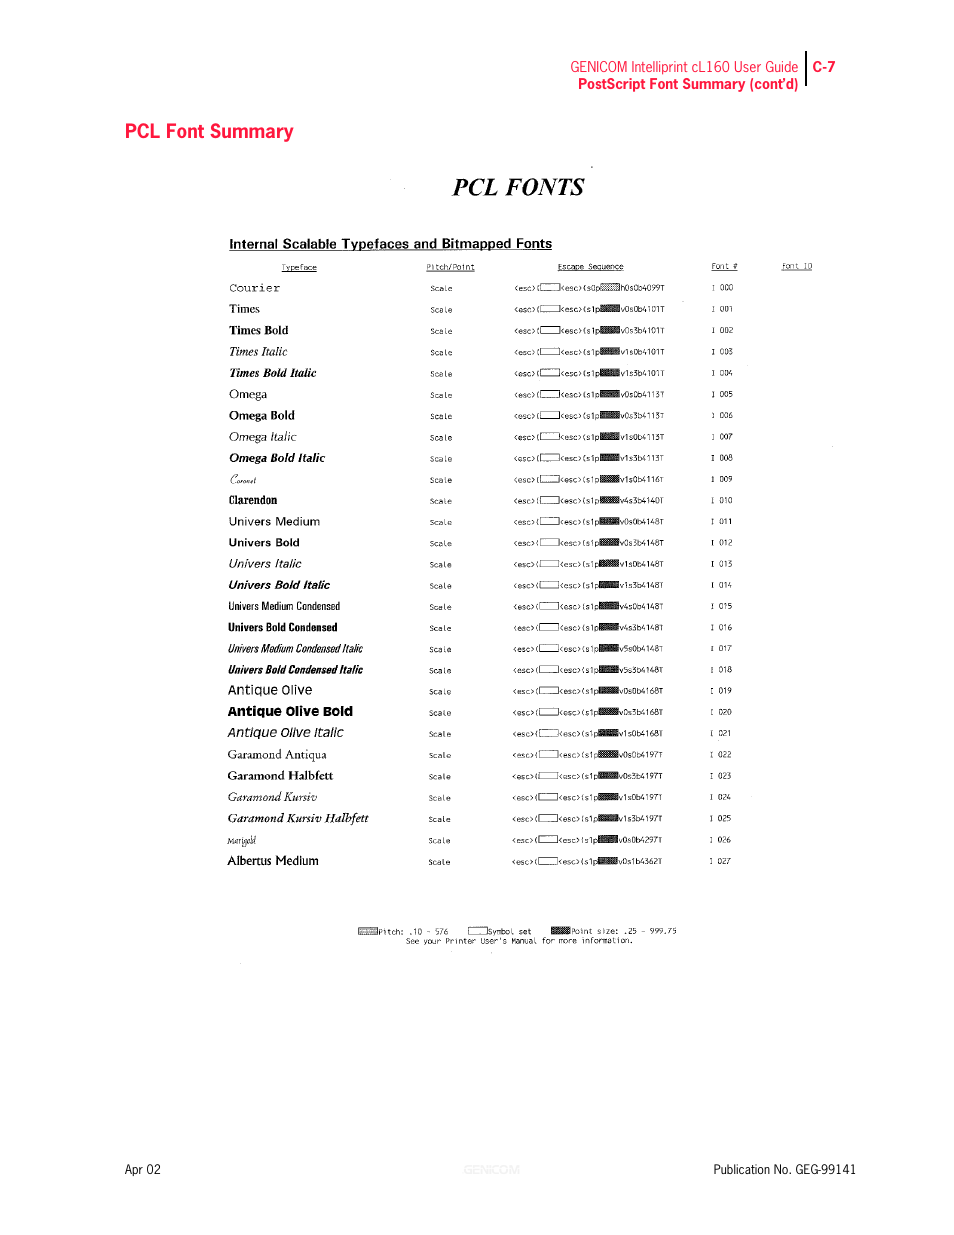 Pcl font summary | Genicom cL160 User Manual | Page 205 / 216